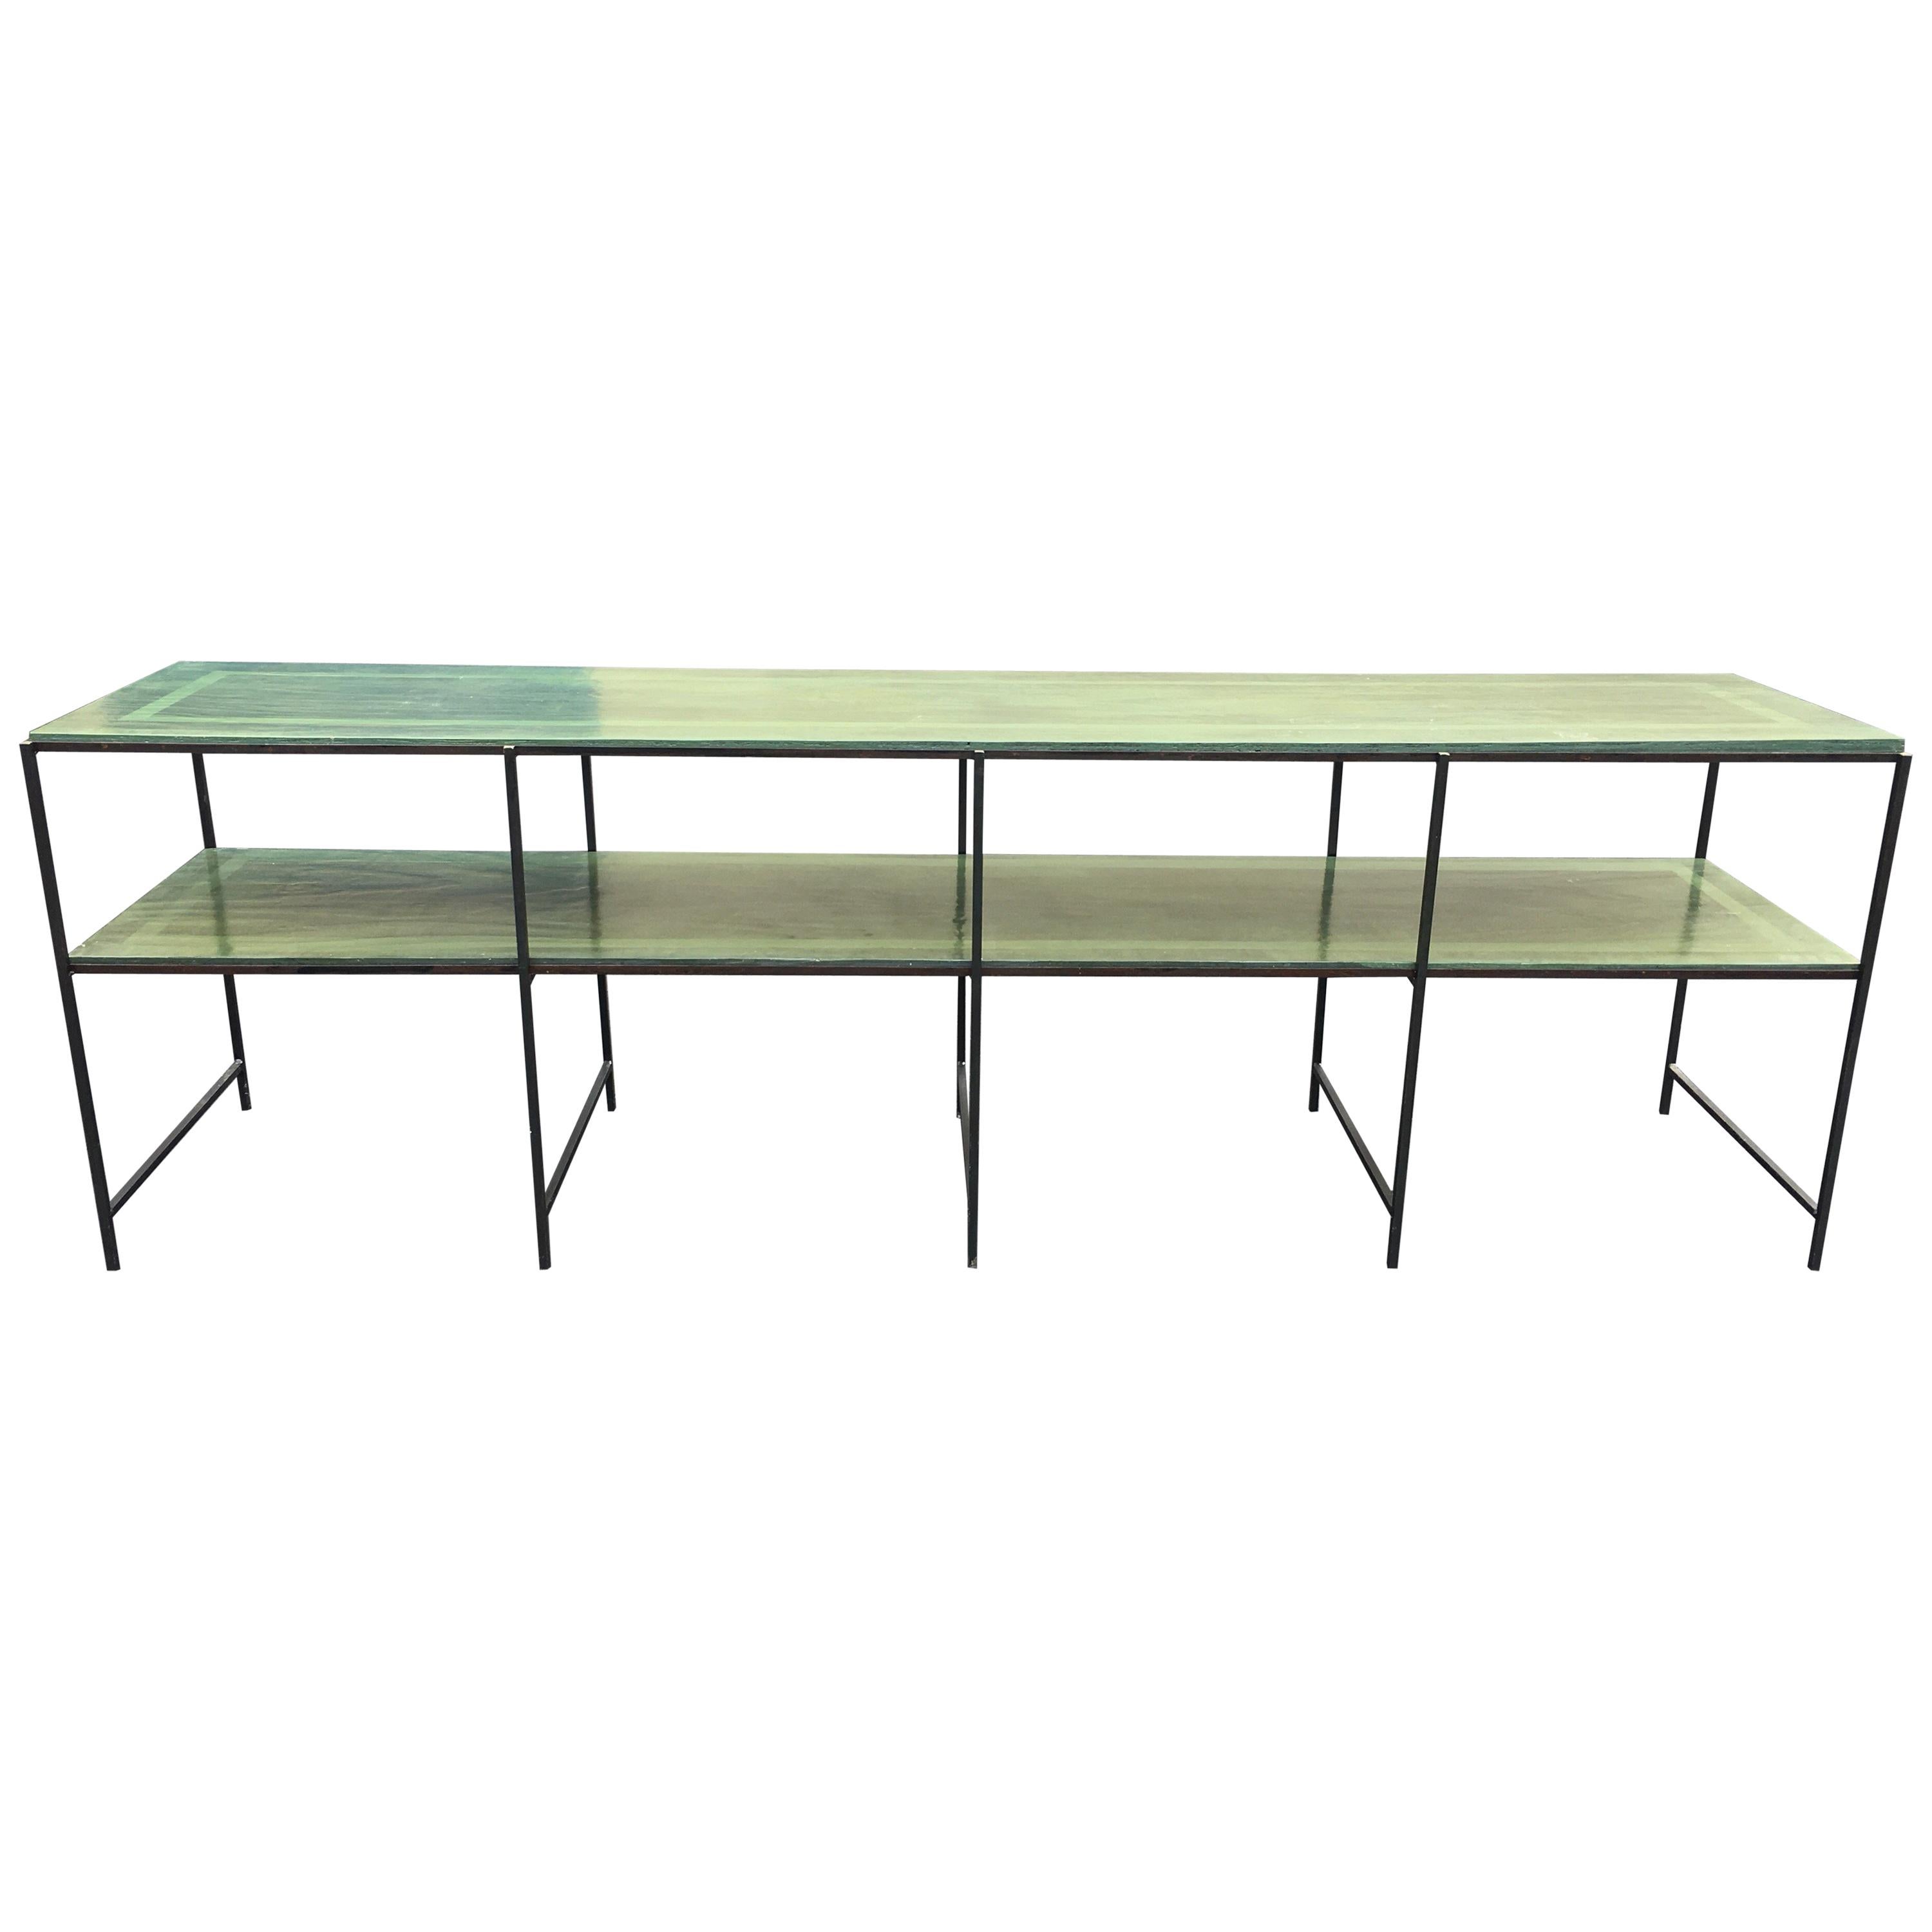 Long Custom Iron Tiered Table with Painted Green Top